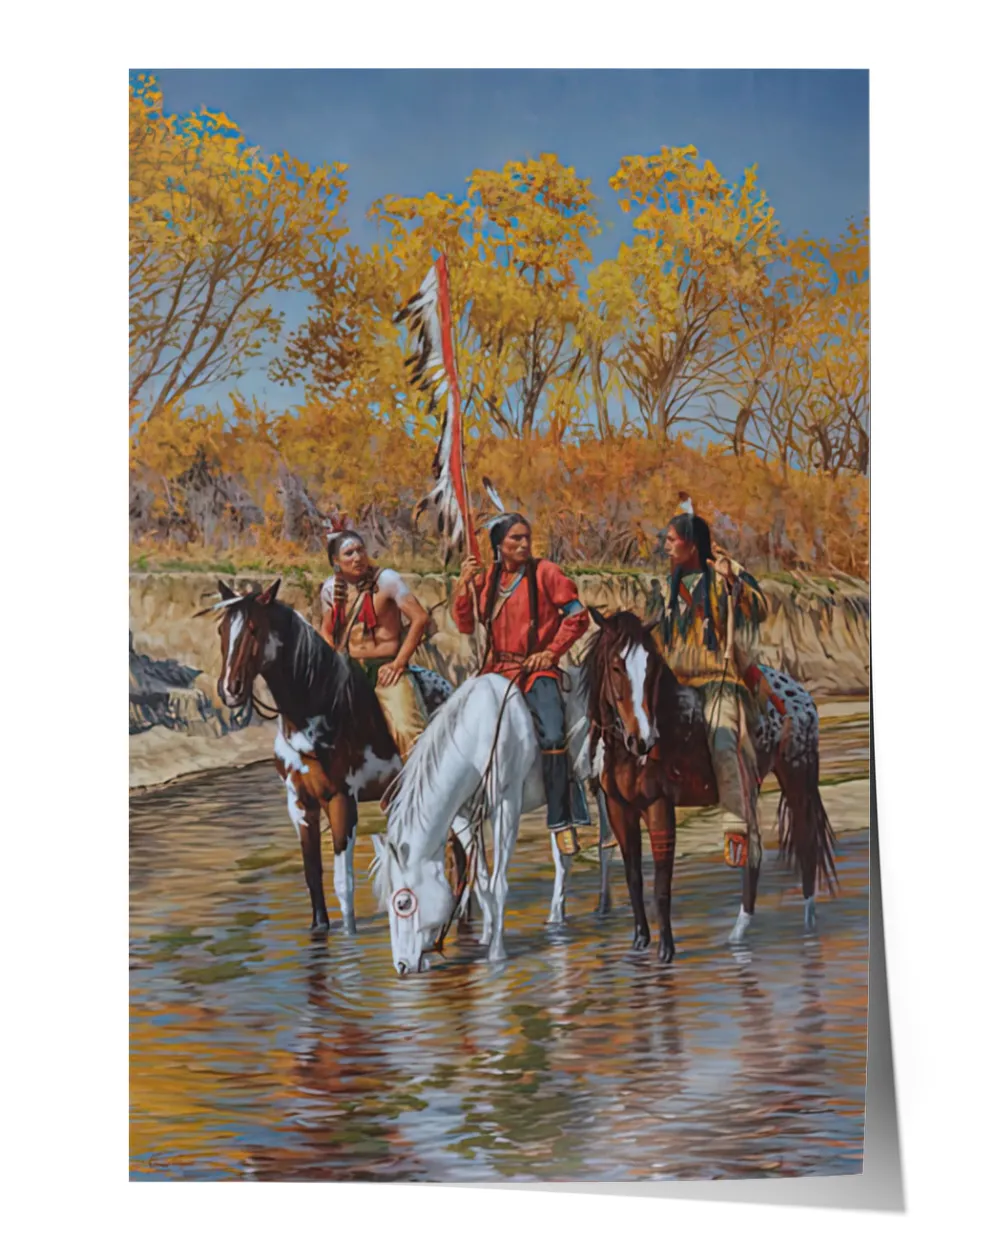 naa-jlv-07 Brazos River Reconnoiter by James Ayers